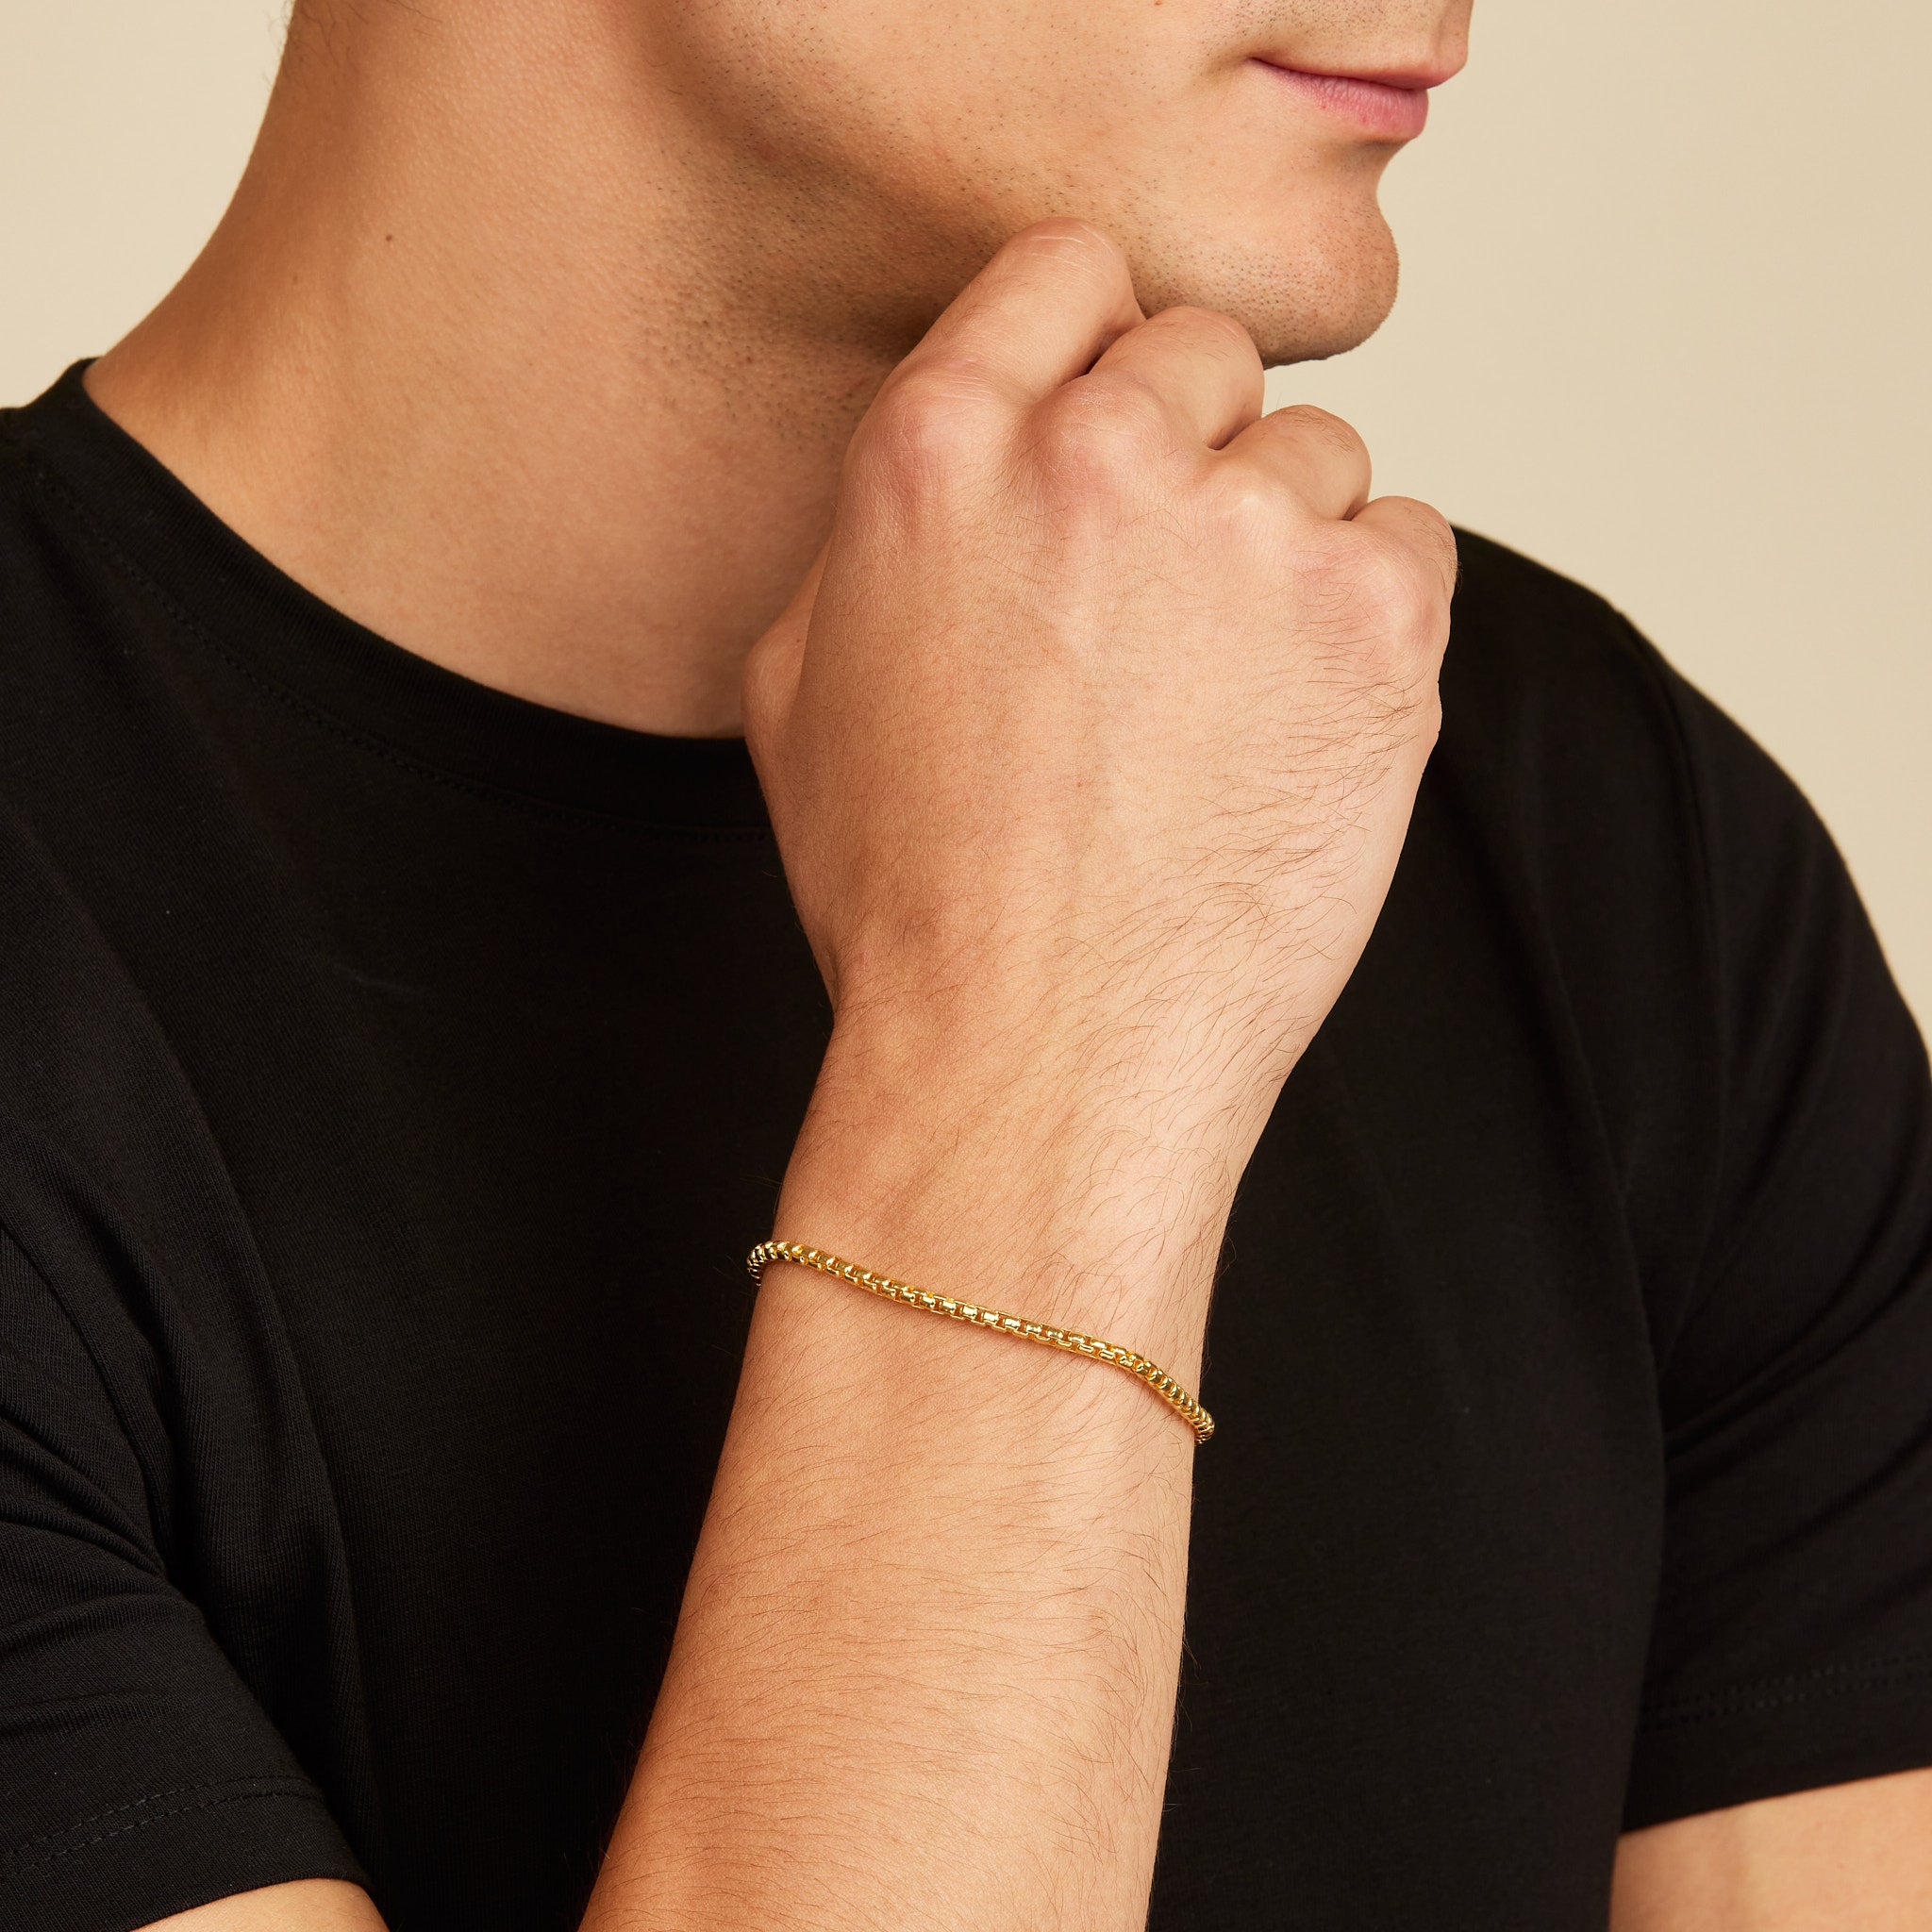 Tiffany 1837™ Makers I.D. chain bracelet in 18k gold, extra large. |  Tiffany & Co.